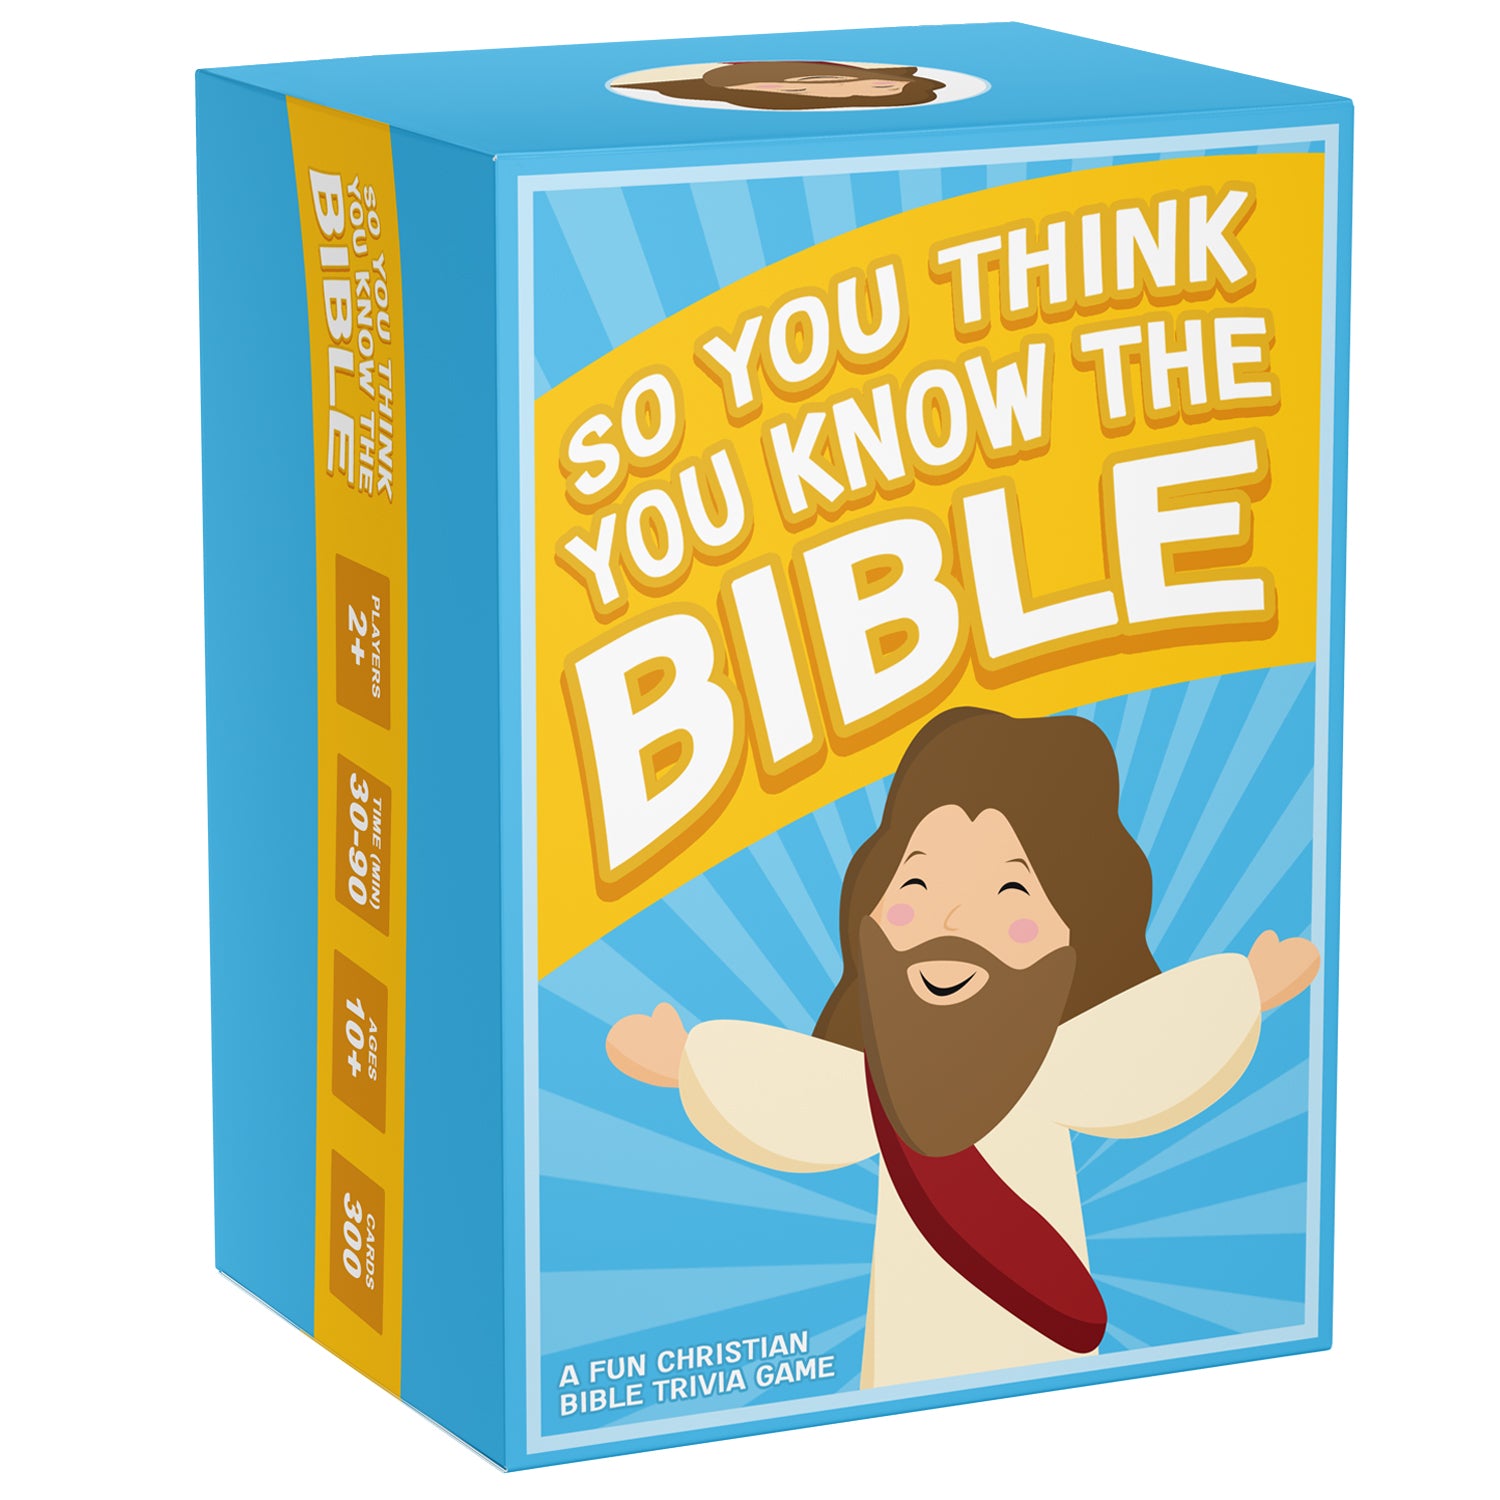 so you think you know the bible